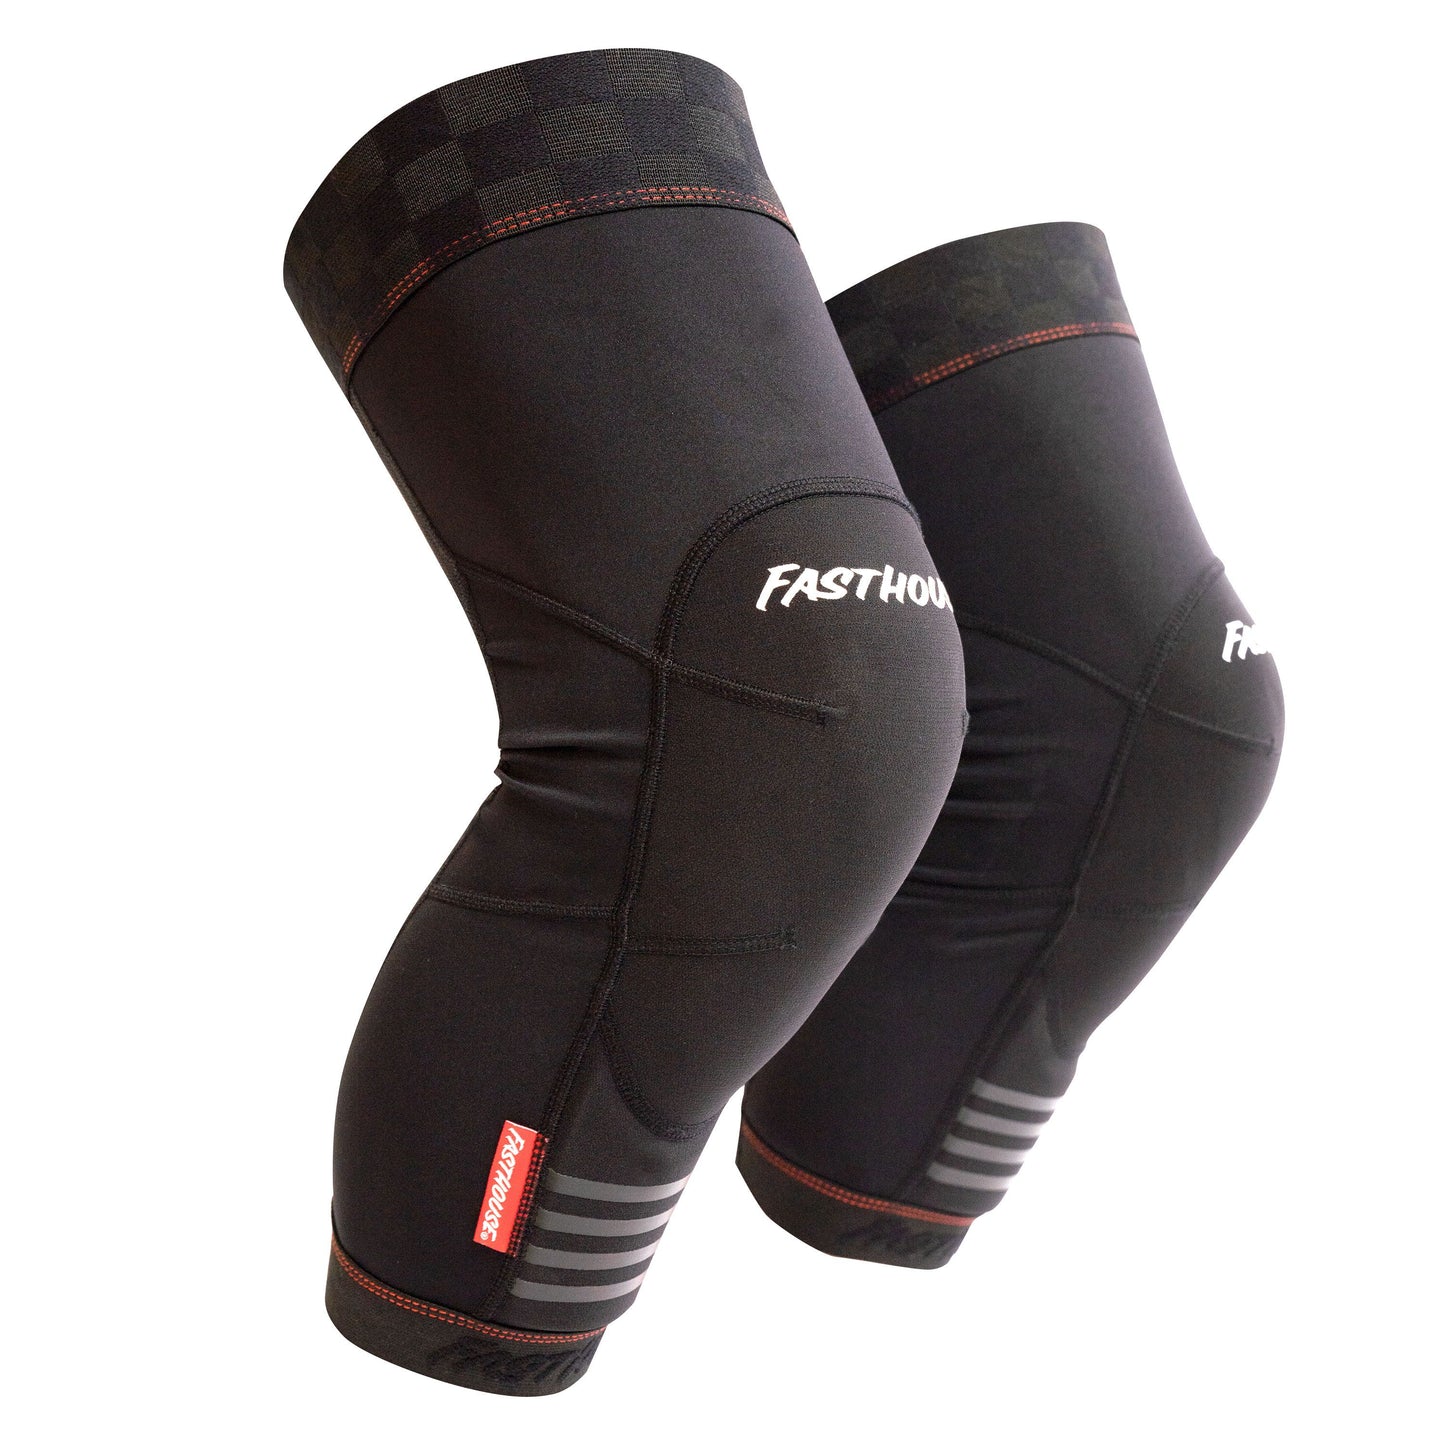 Fasthouse Hooper Knee Pad Black Protective Gear